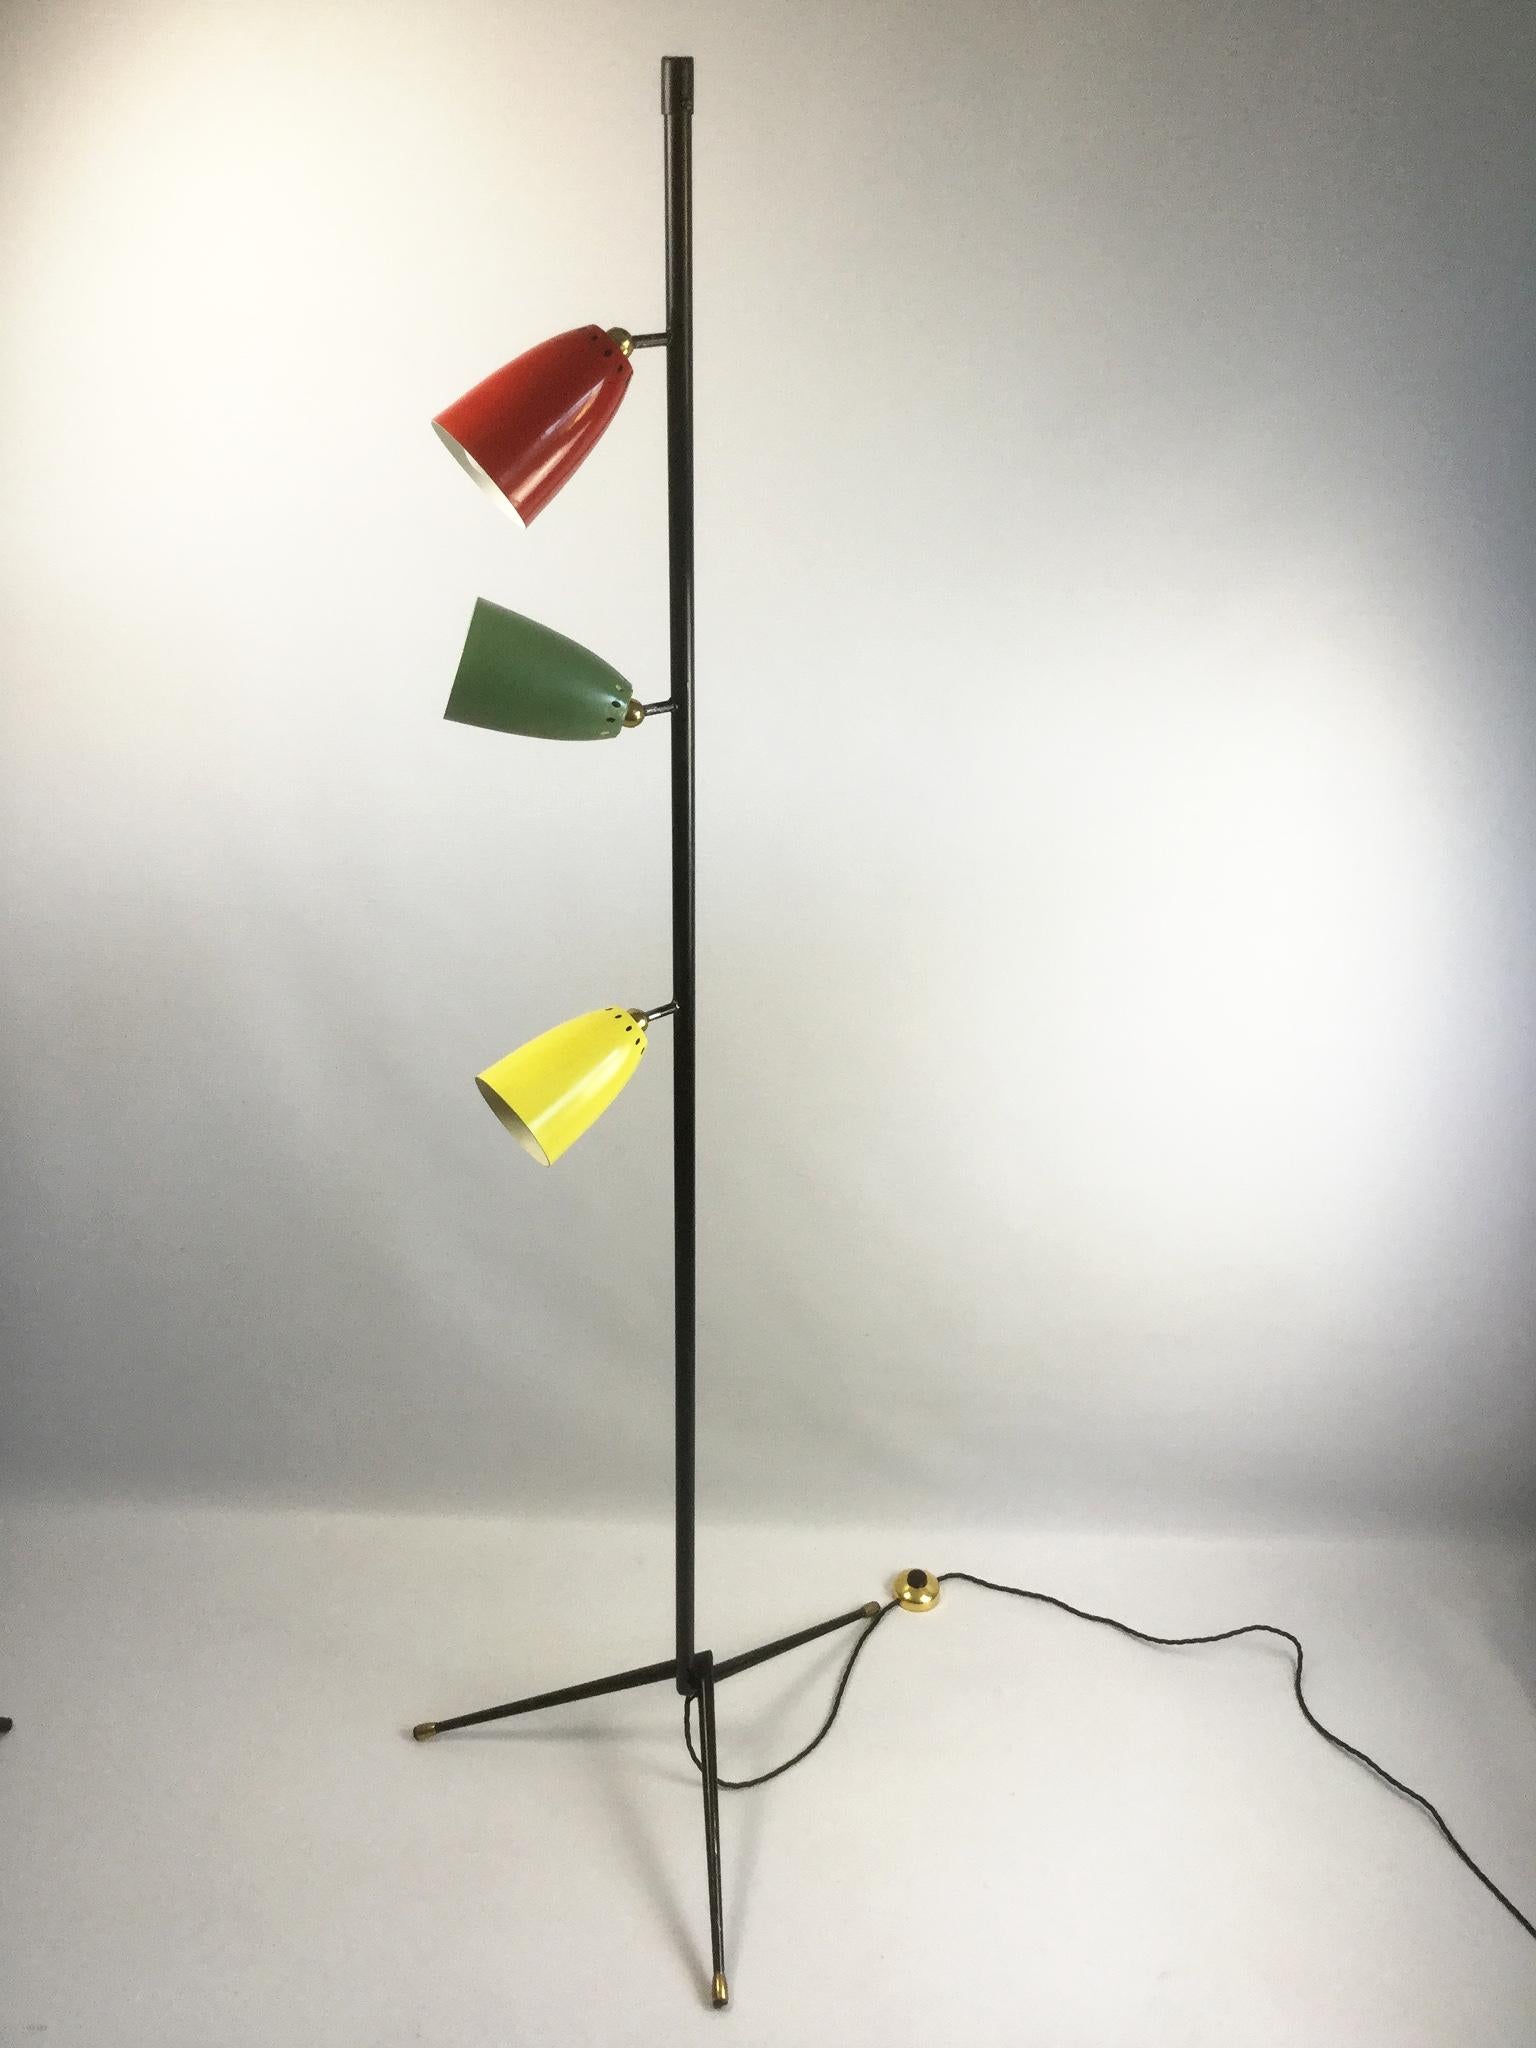 Standing floor lamp with a tripod base and three colored shades
Rewired with an electrical insulated cable and footswitch.